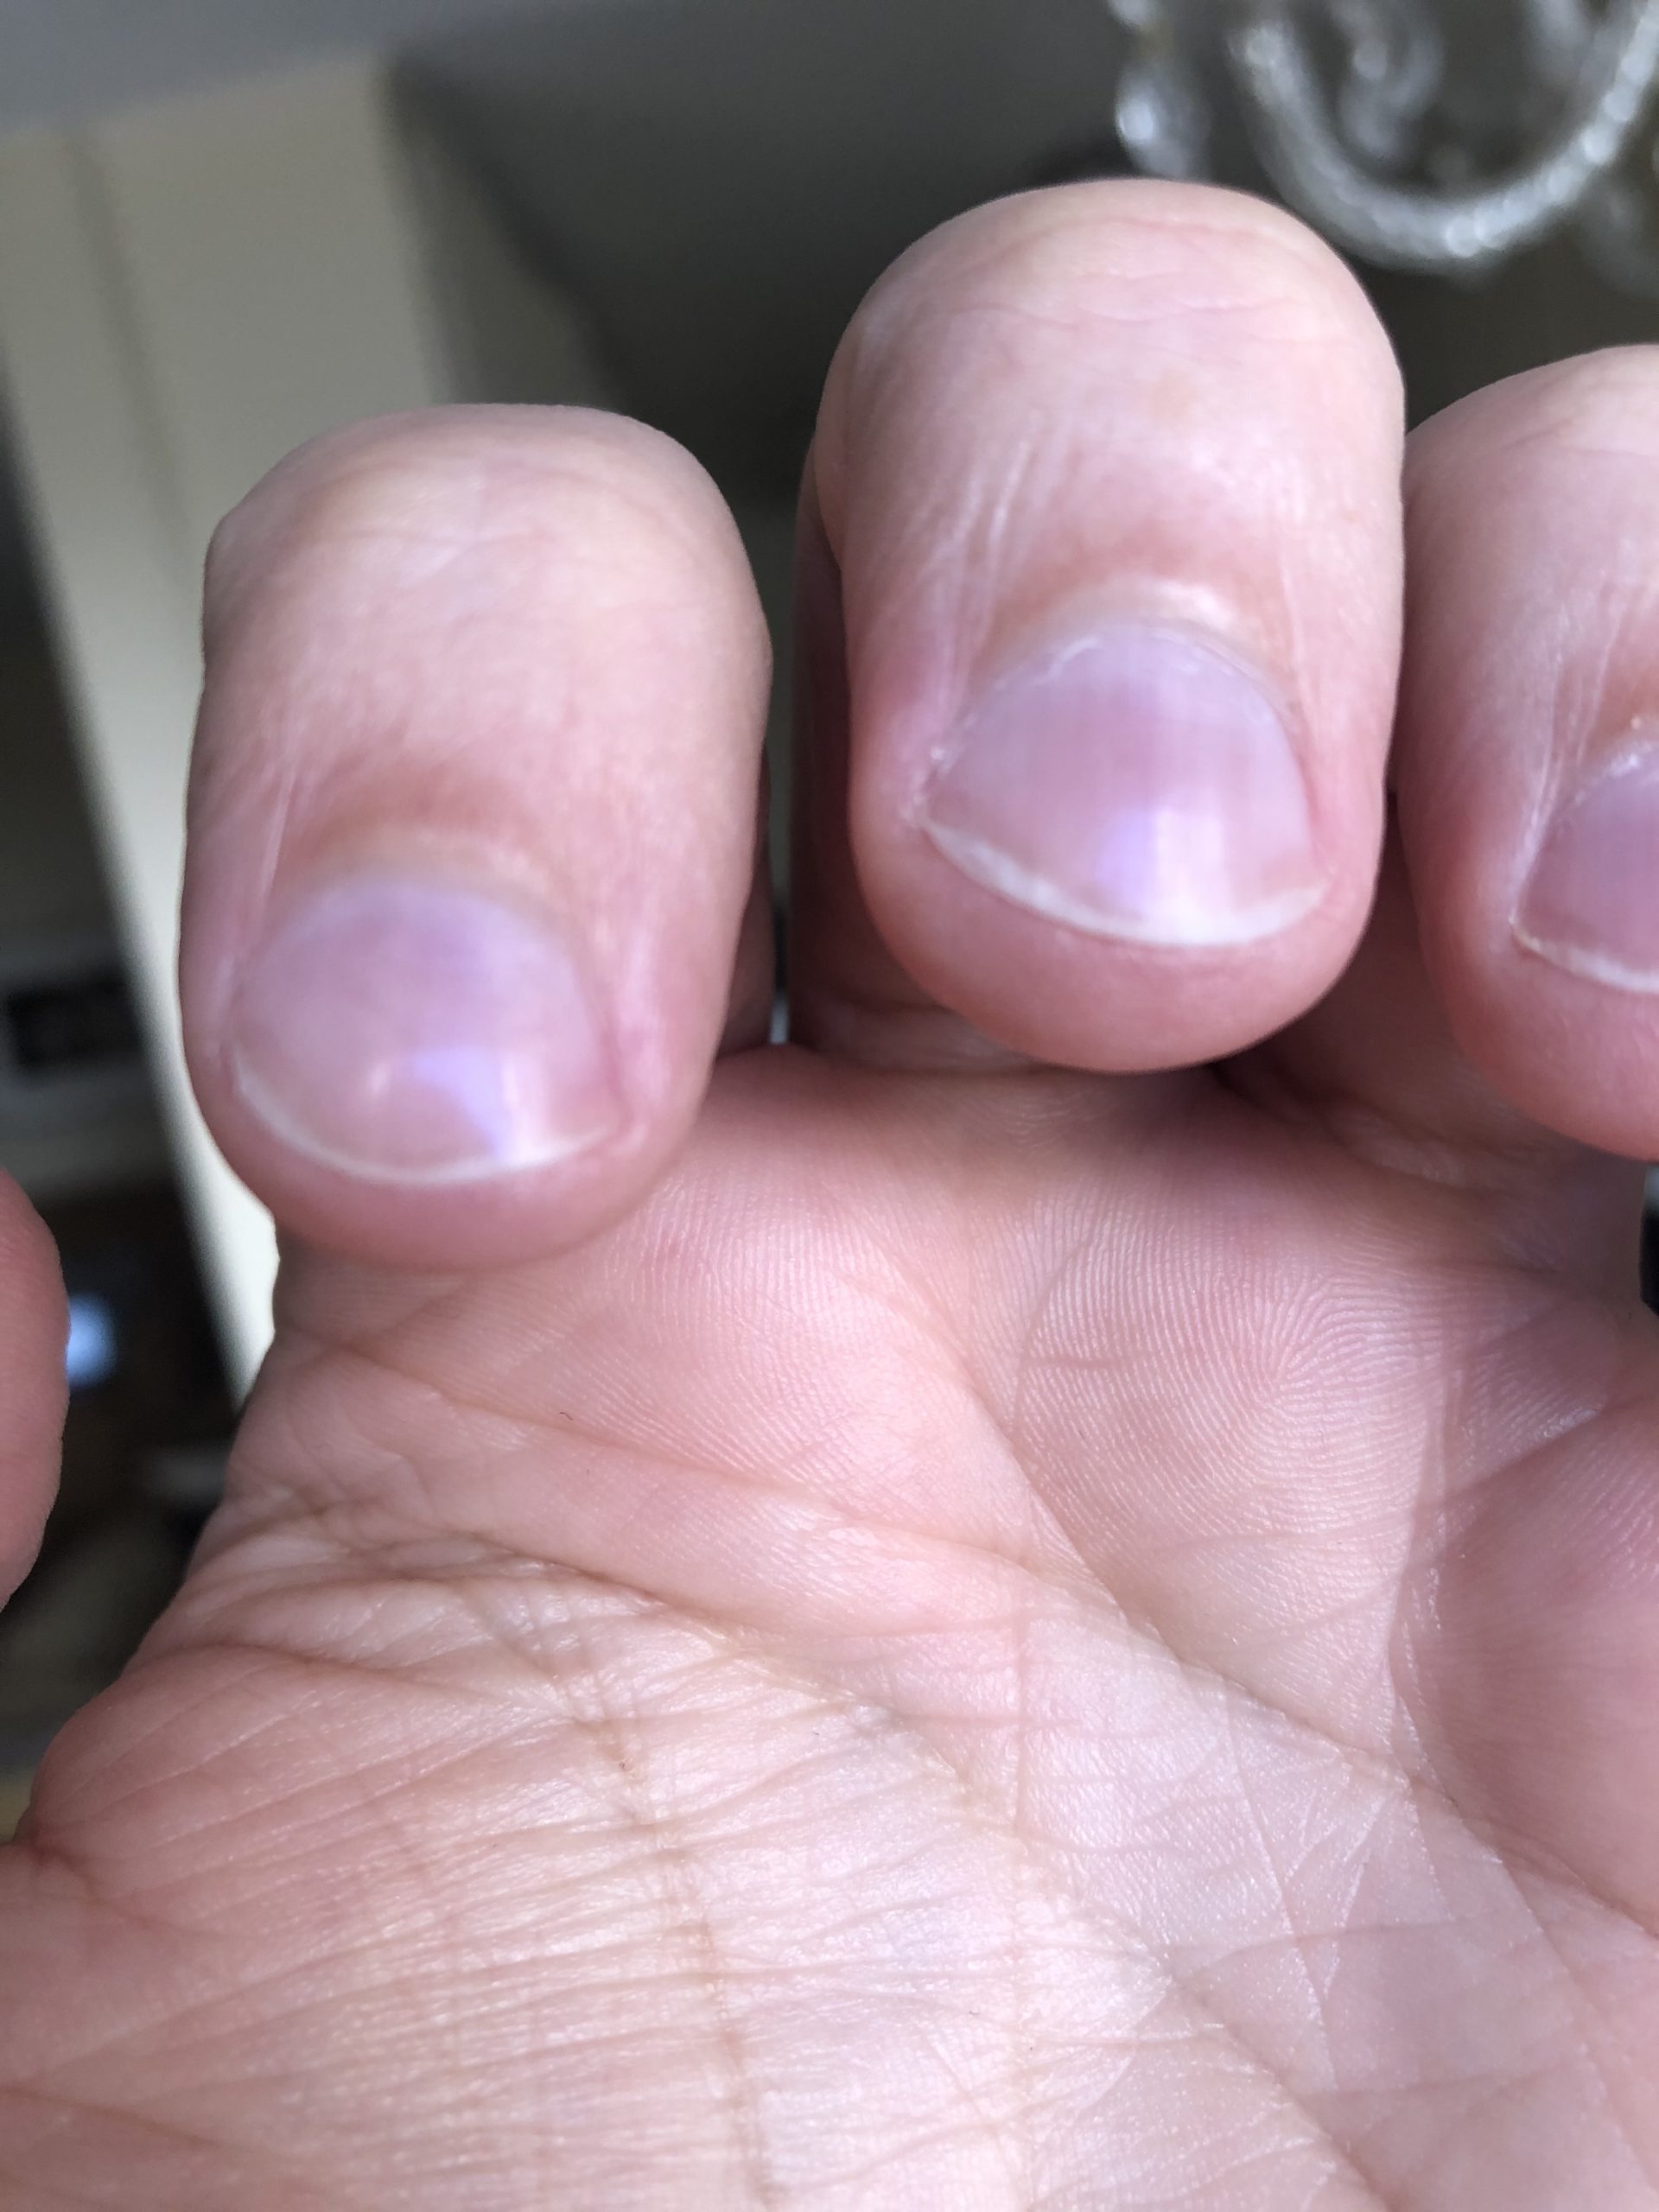 I Tried Getting A Manicure To Change My Nail Chewing Ways Dollar Shave Club Original Content